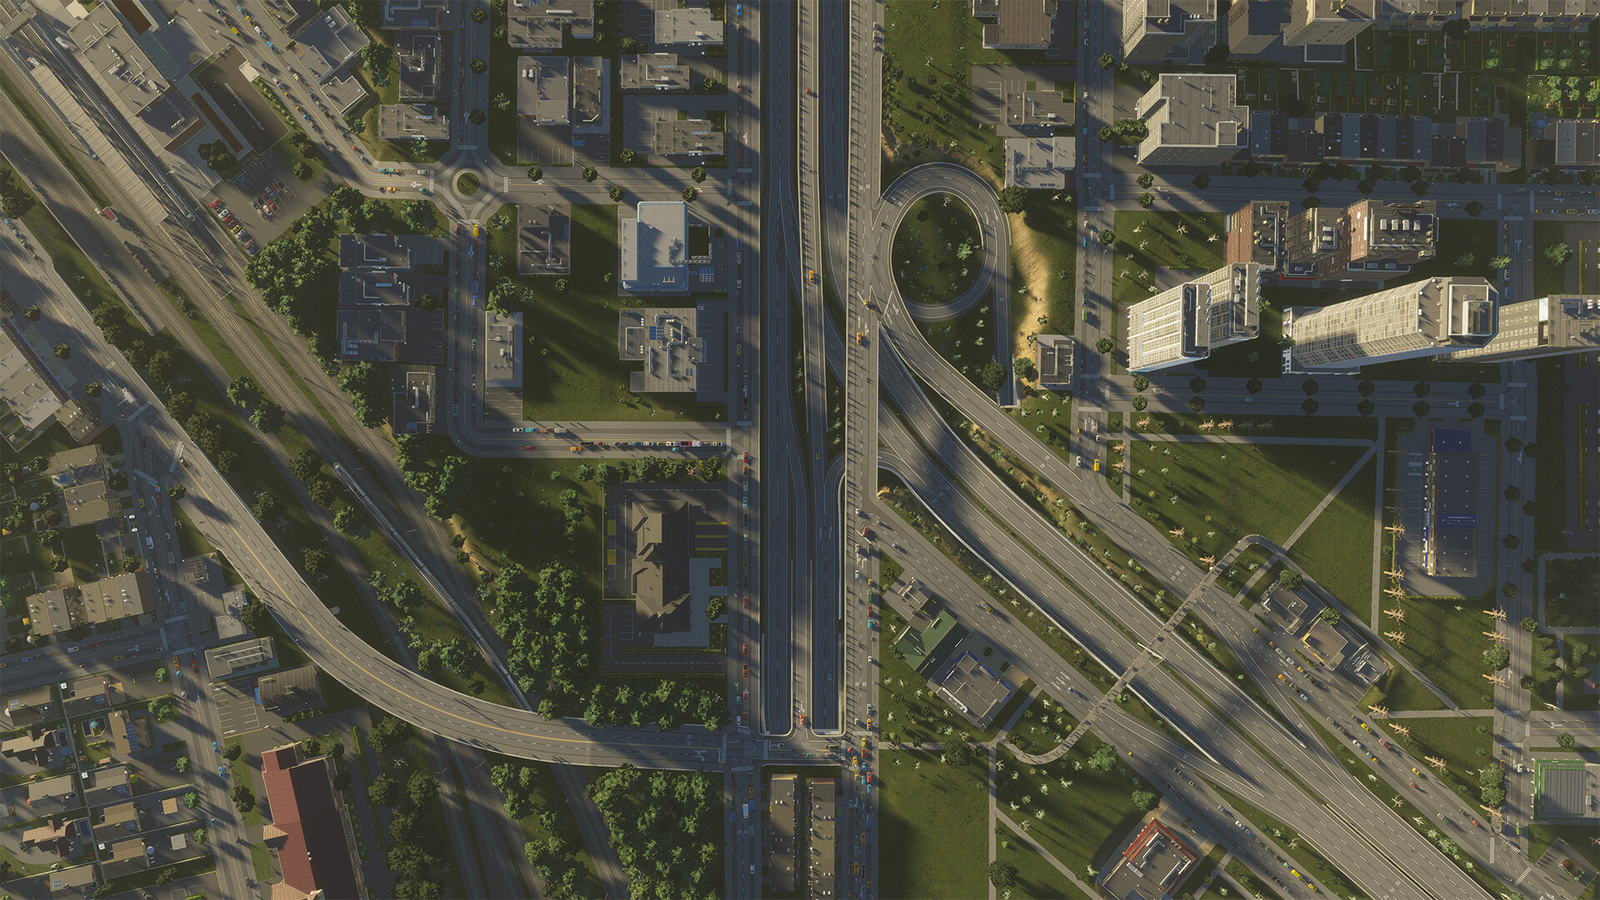 Cities: Skylines 2 review : r/pcgaming